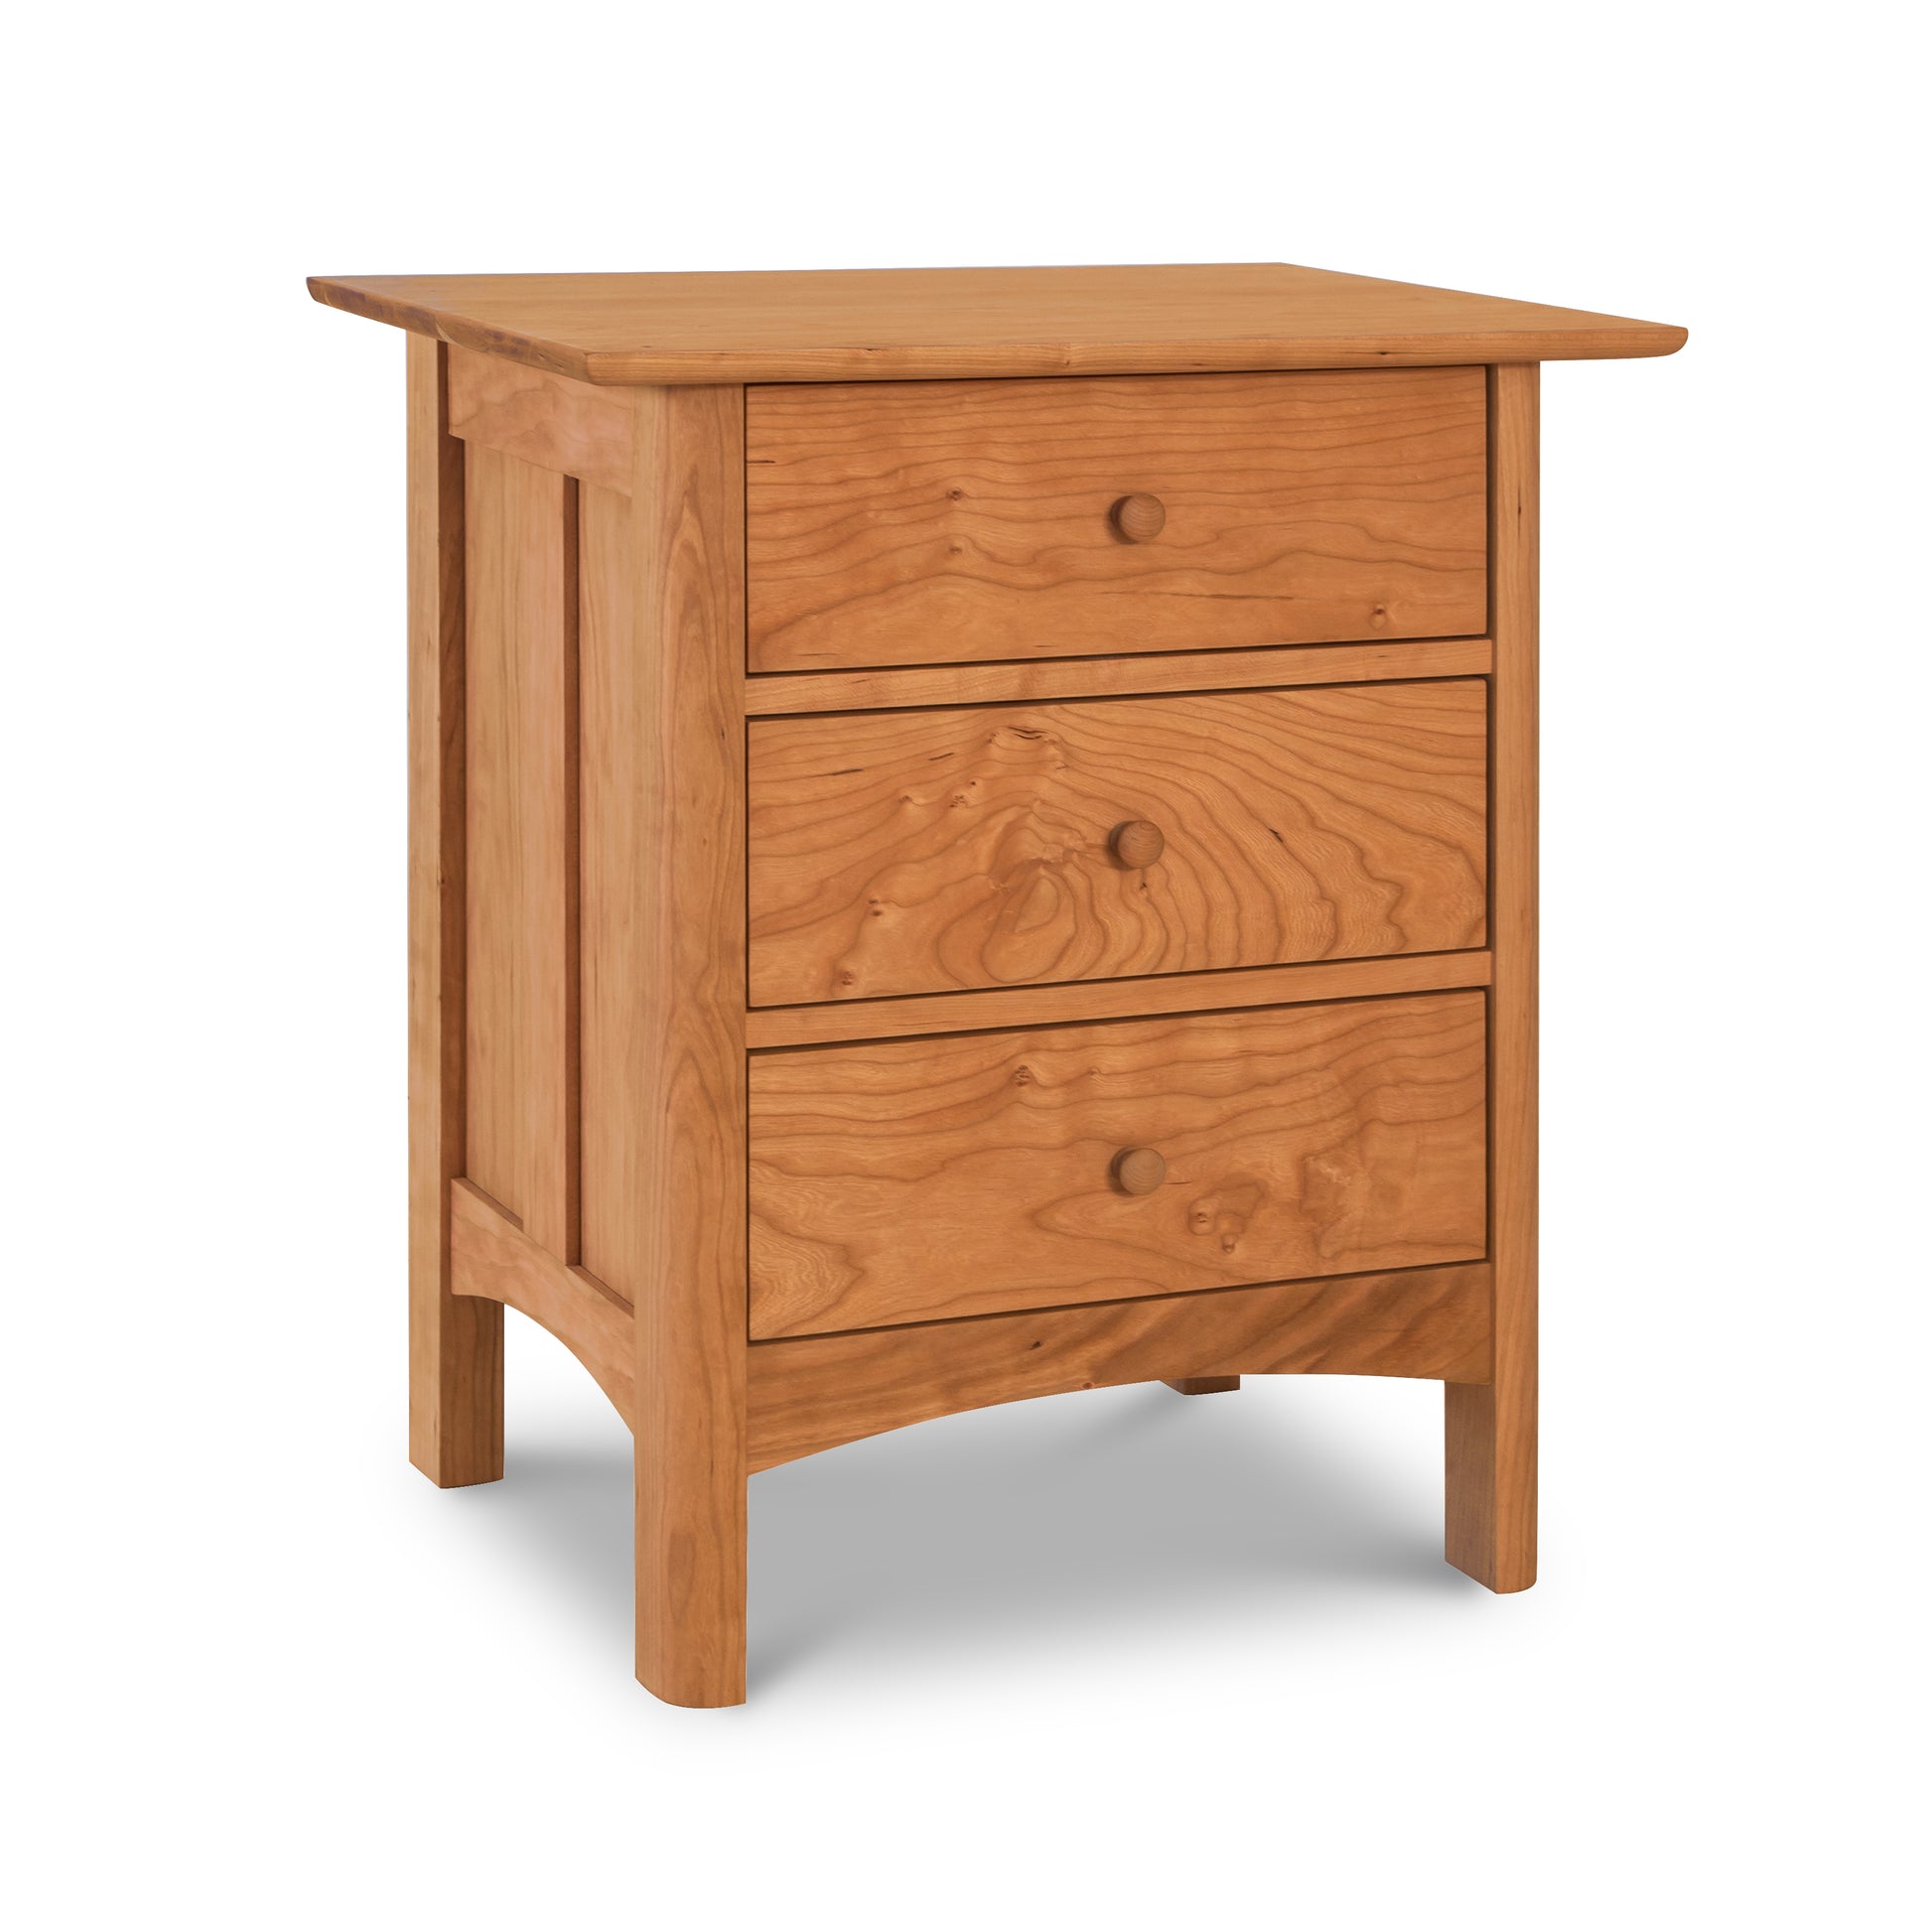 A luxury Heartwood Shaker 3-Drawer Nightstand crafted from exquisite wood, featuring three drawers by Vermont Furniture Designs.